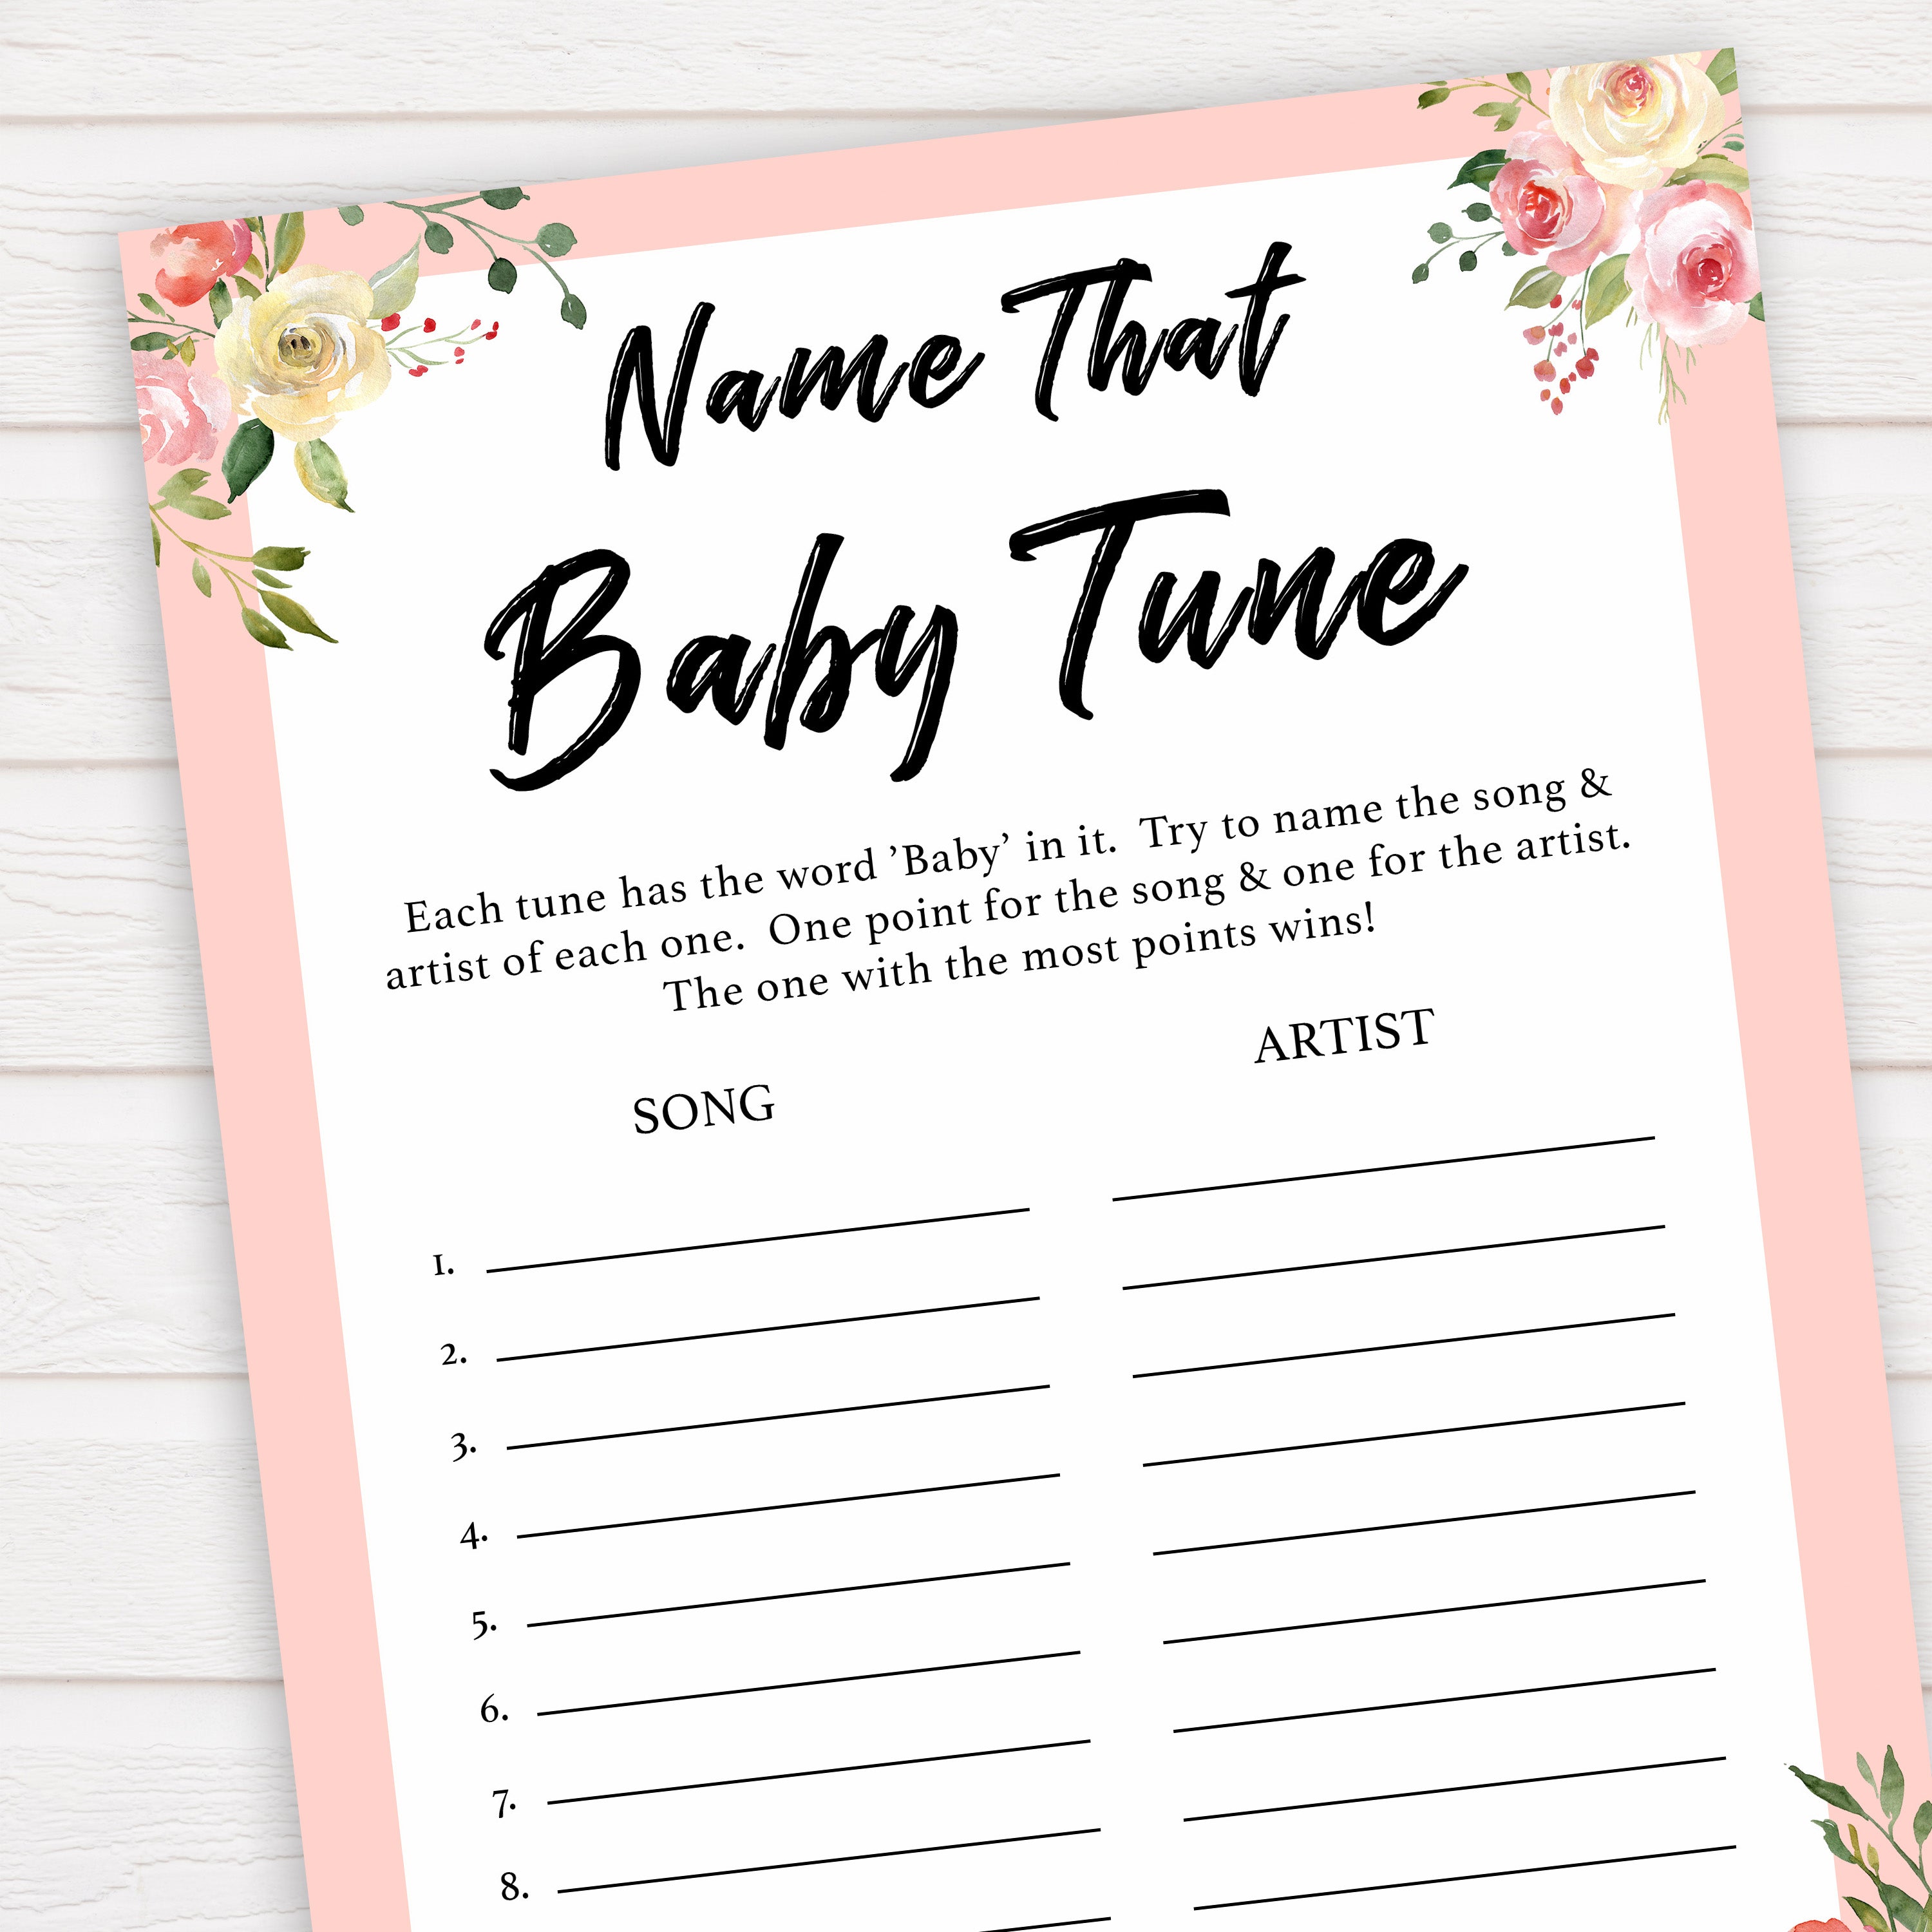 spring floral name that baby tune baby shower games, printable baby shower games, fun baby shower games, baby shower games, popular baby shower games